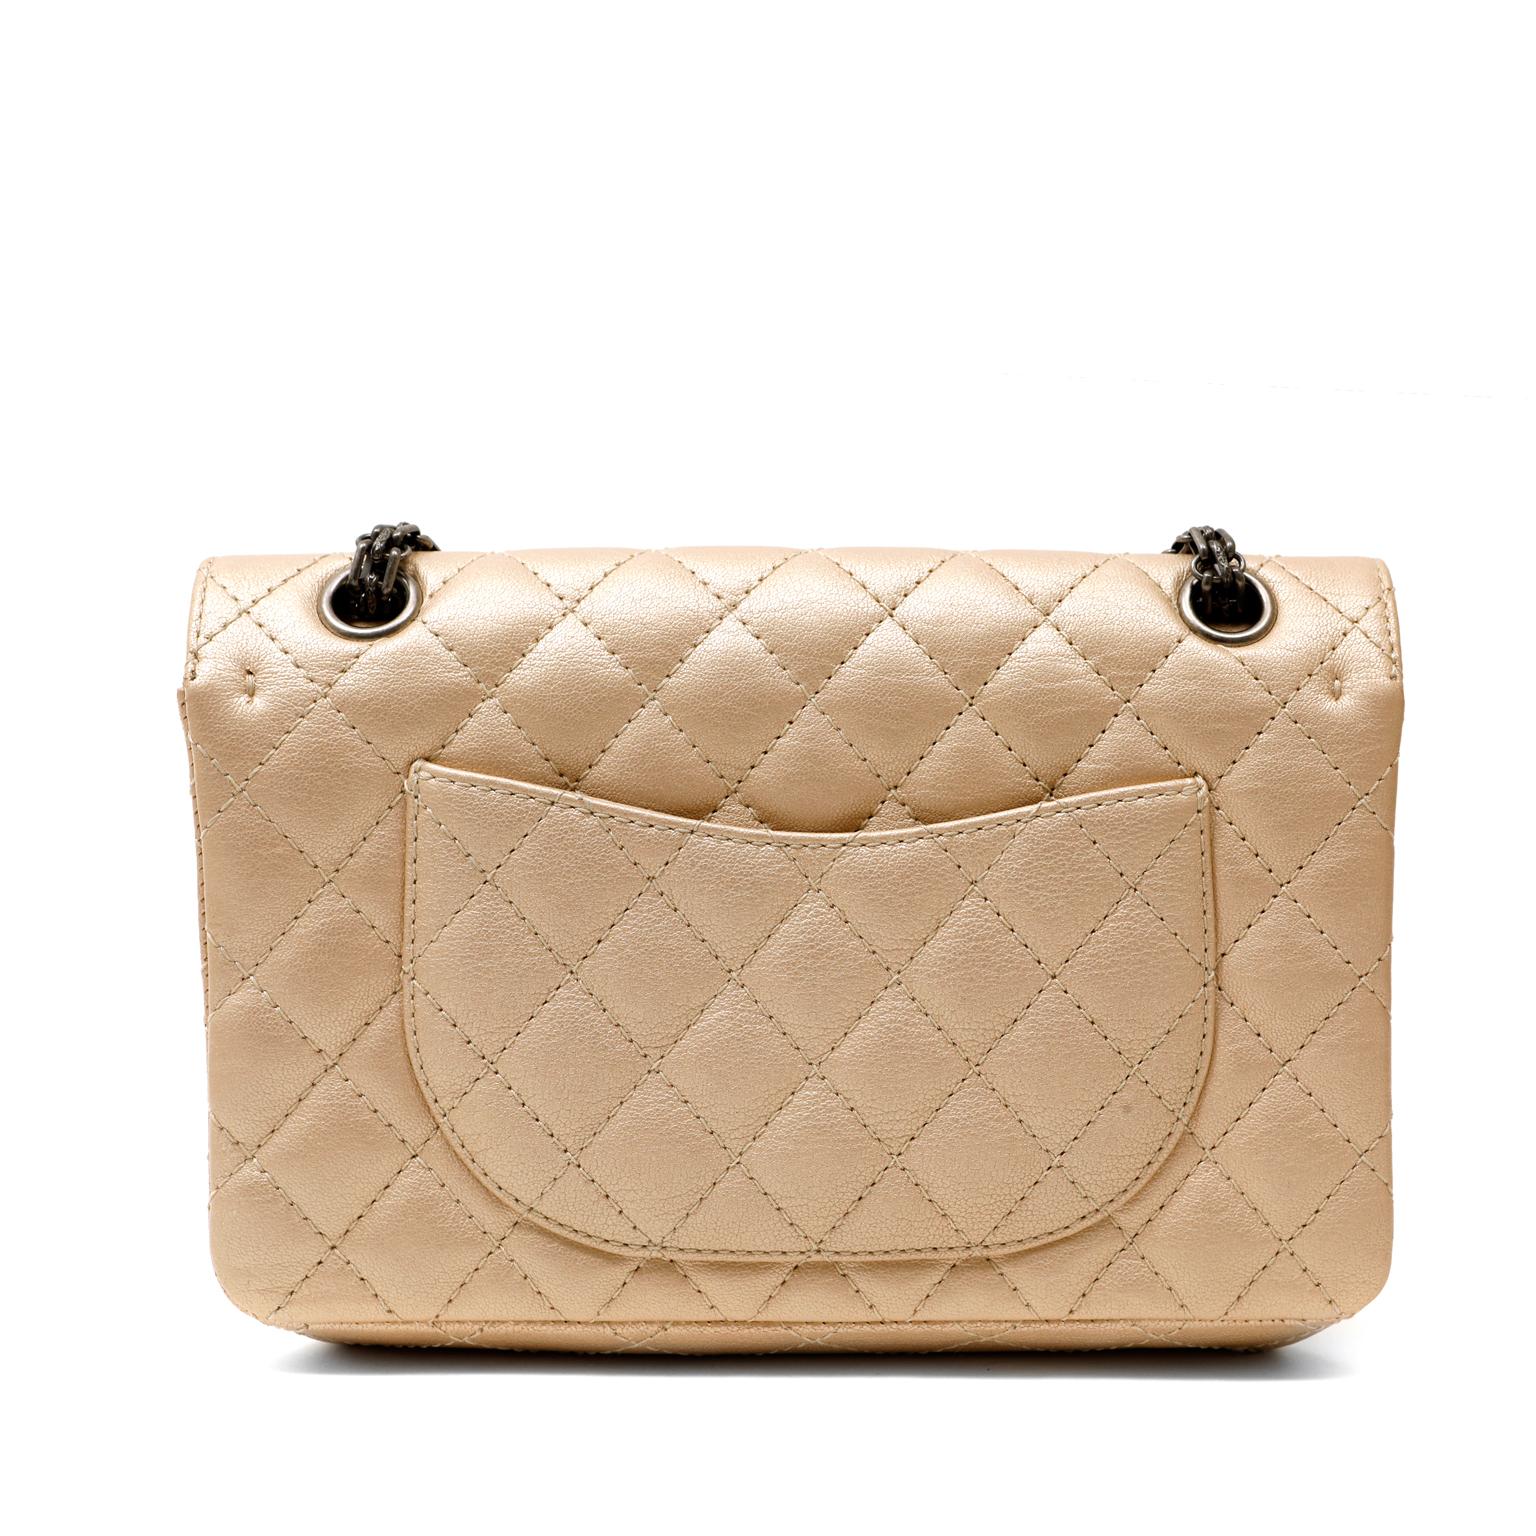 This authentic Chanel Metallic Beige Reissue Flap Bag is in pristine condition.  A soft neutral with a bit of edge, this Chanel is a great addition to any collection.
Beige quilted leather with a subtle metallic sheen can be worn with nearly any